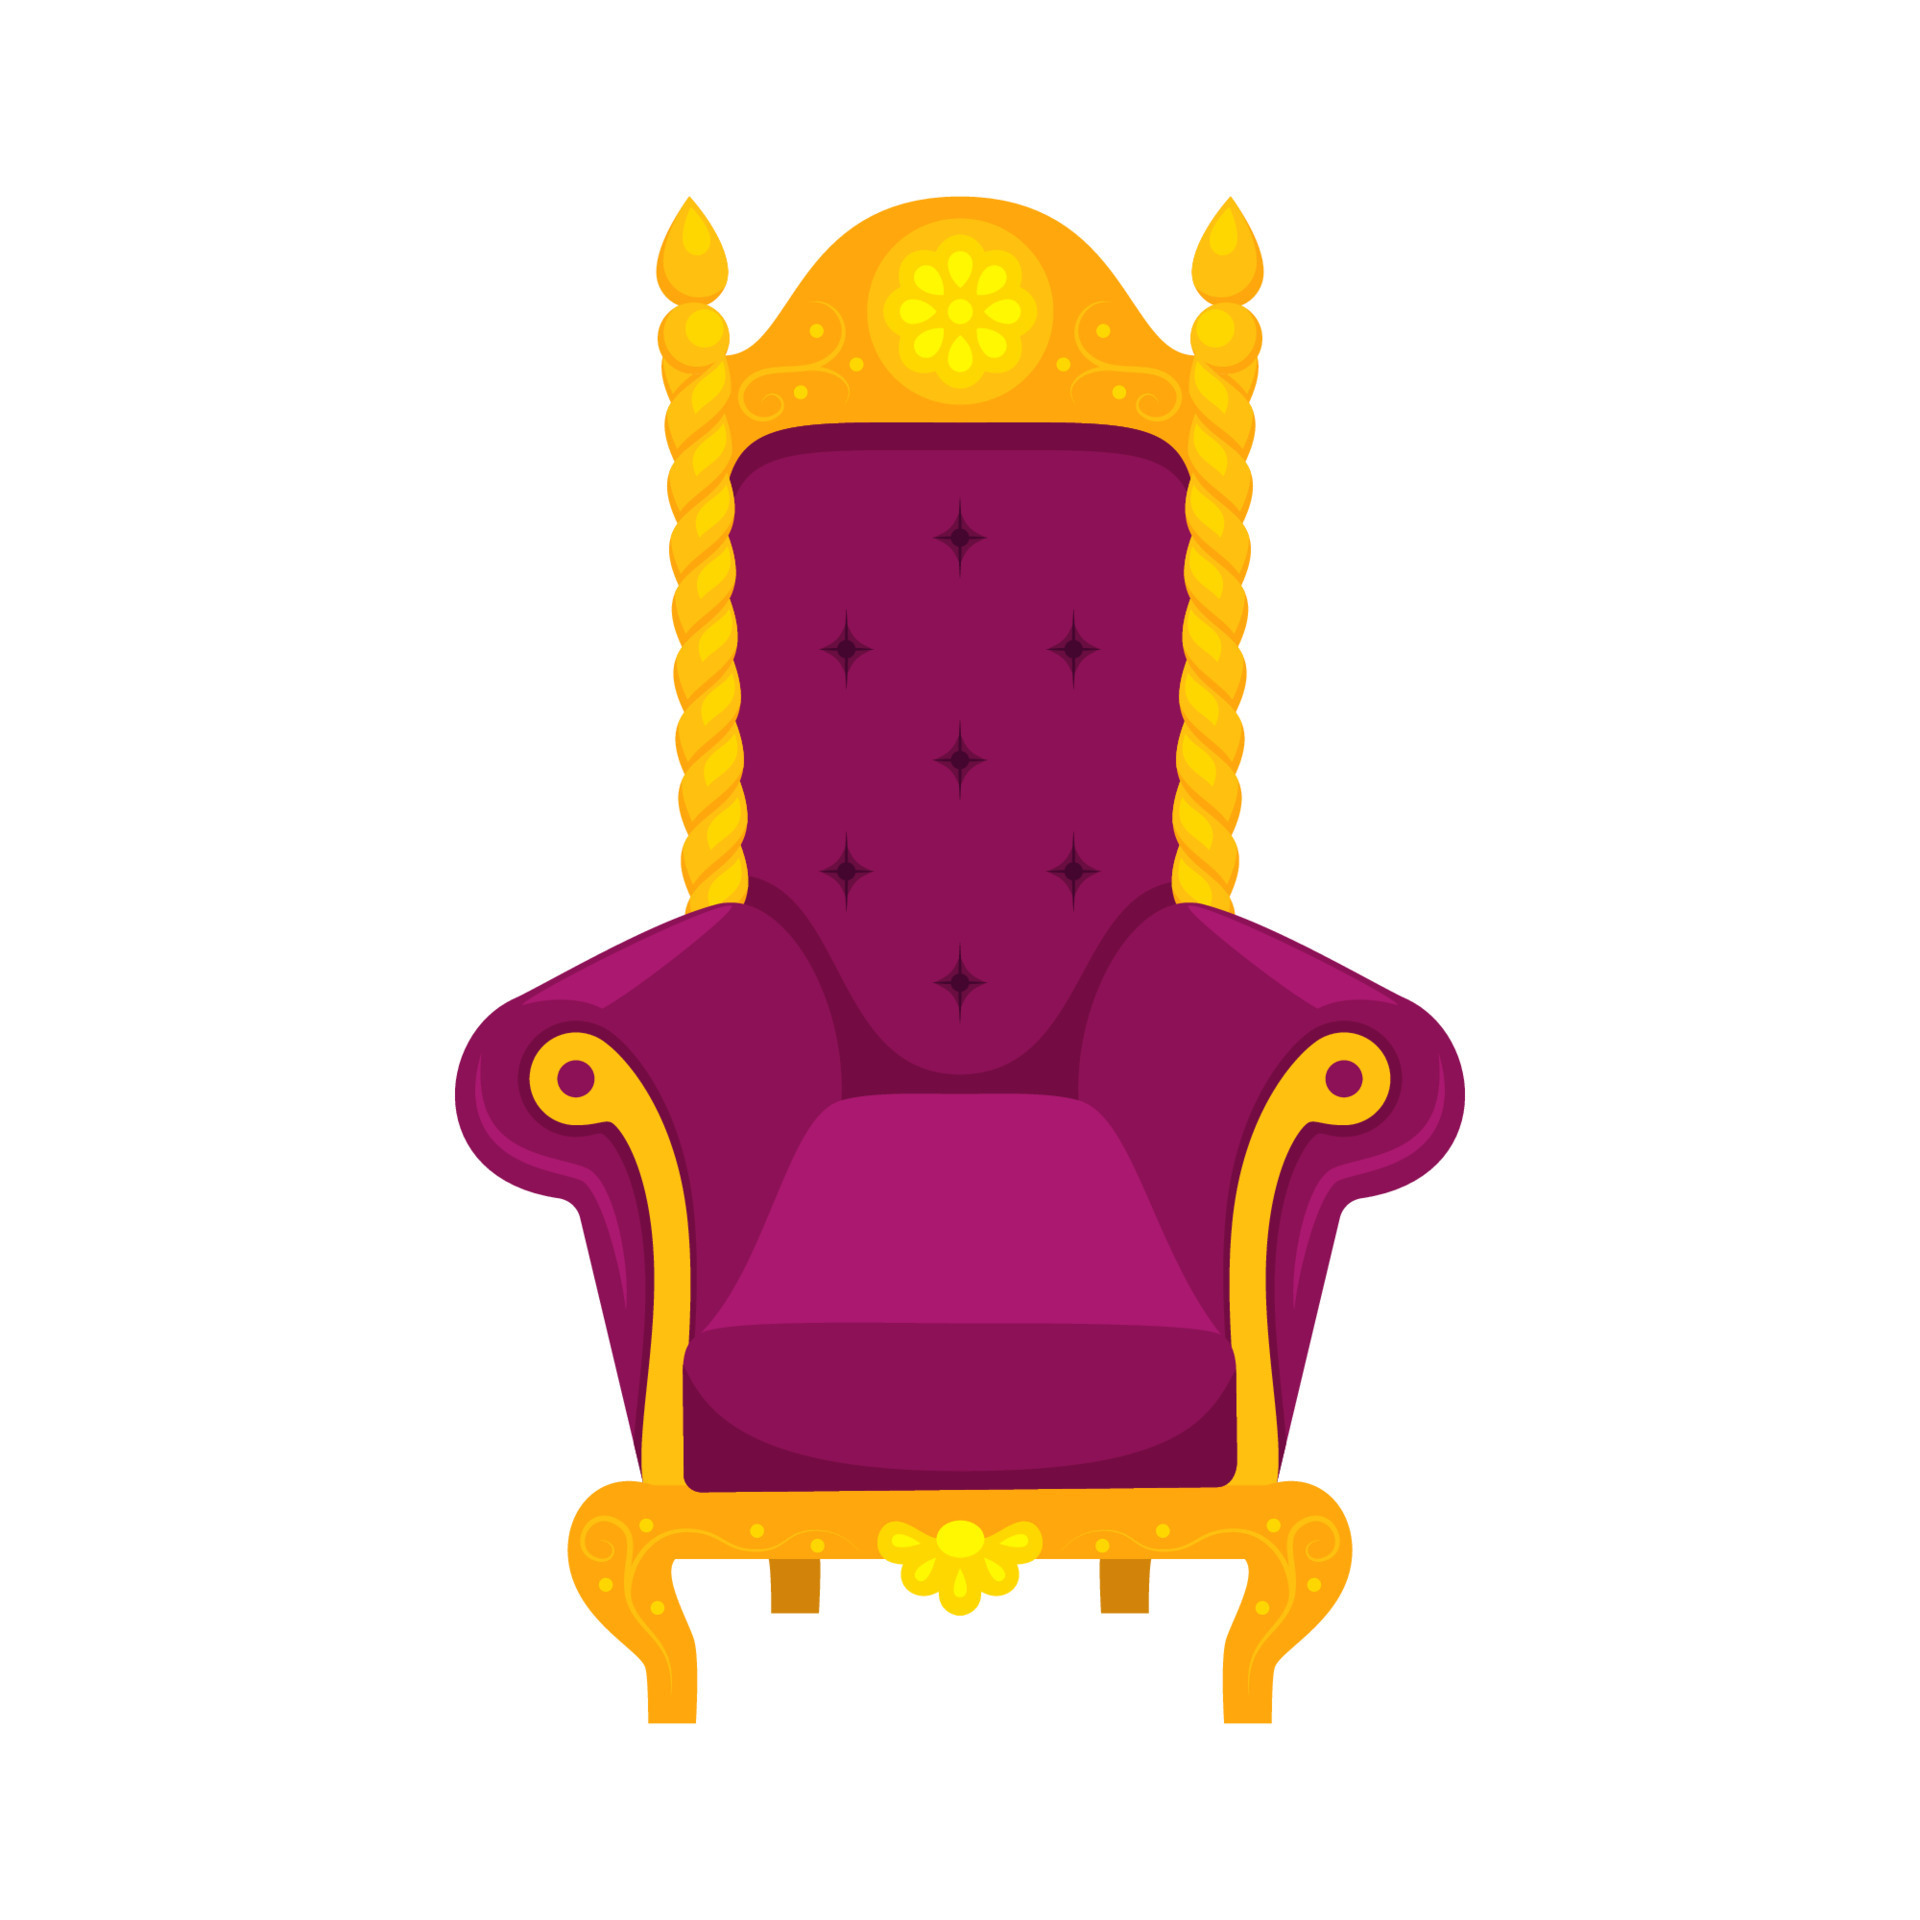 https://static.vecteezy.com/system/resources/previews/017/370/856/original/purple-velvet-royal-armchair-or-throne-bright-luxurious-gilded-throne-chair-for-queen-or-king-isolated-on-white-background-antique-and-medieval-furniture-concept-flat-illustration-vector.jpg